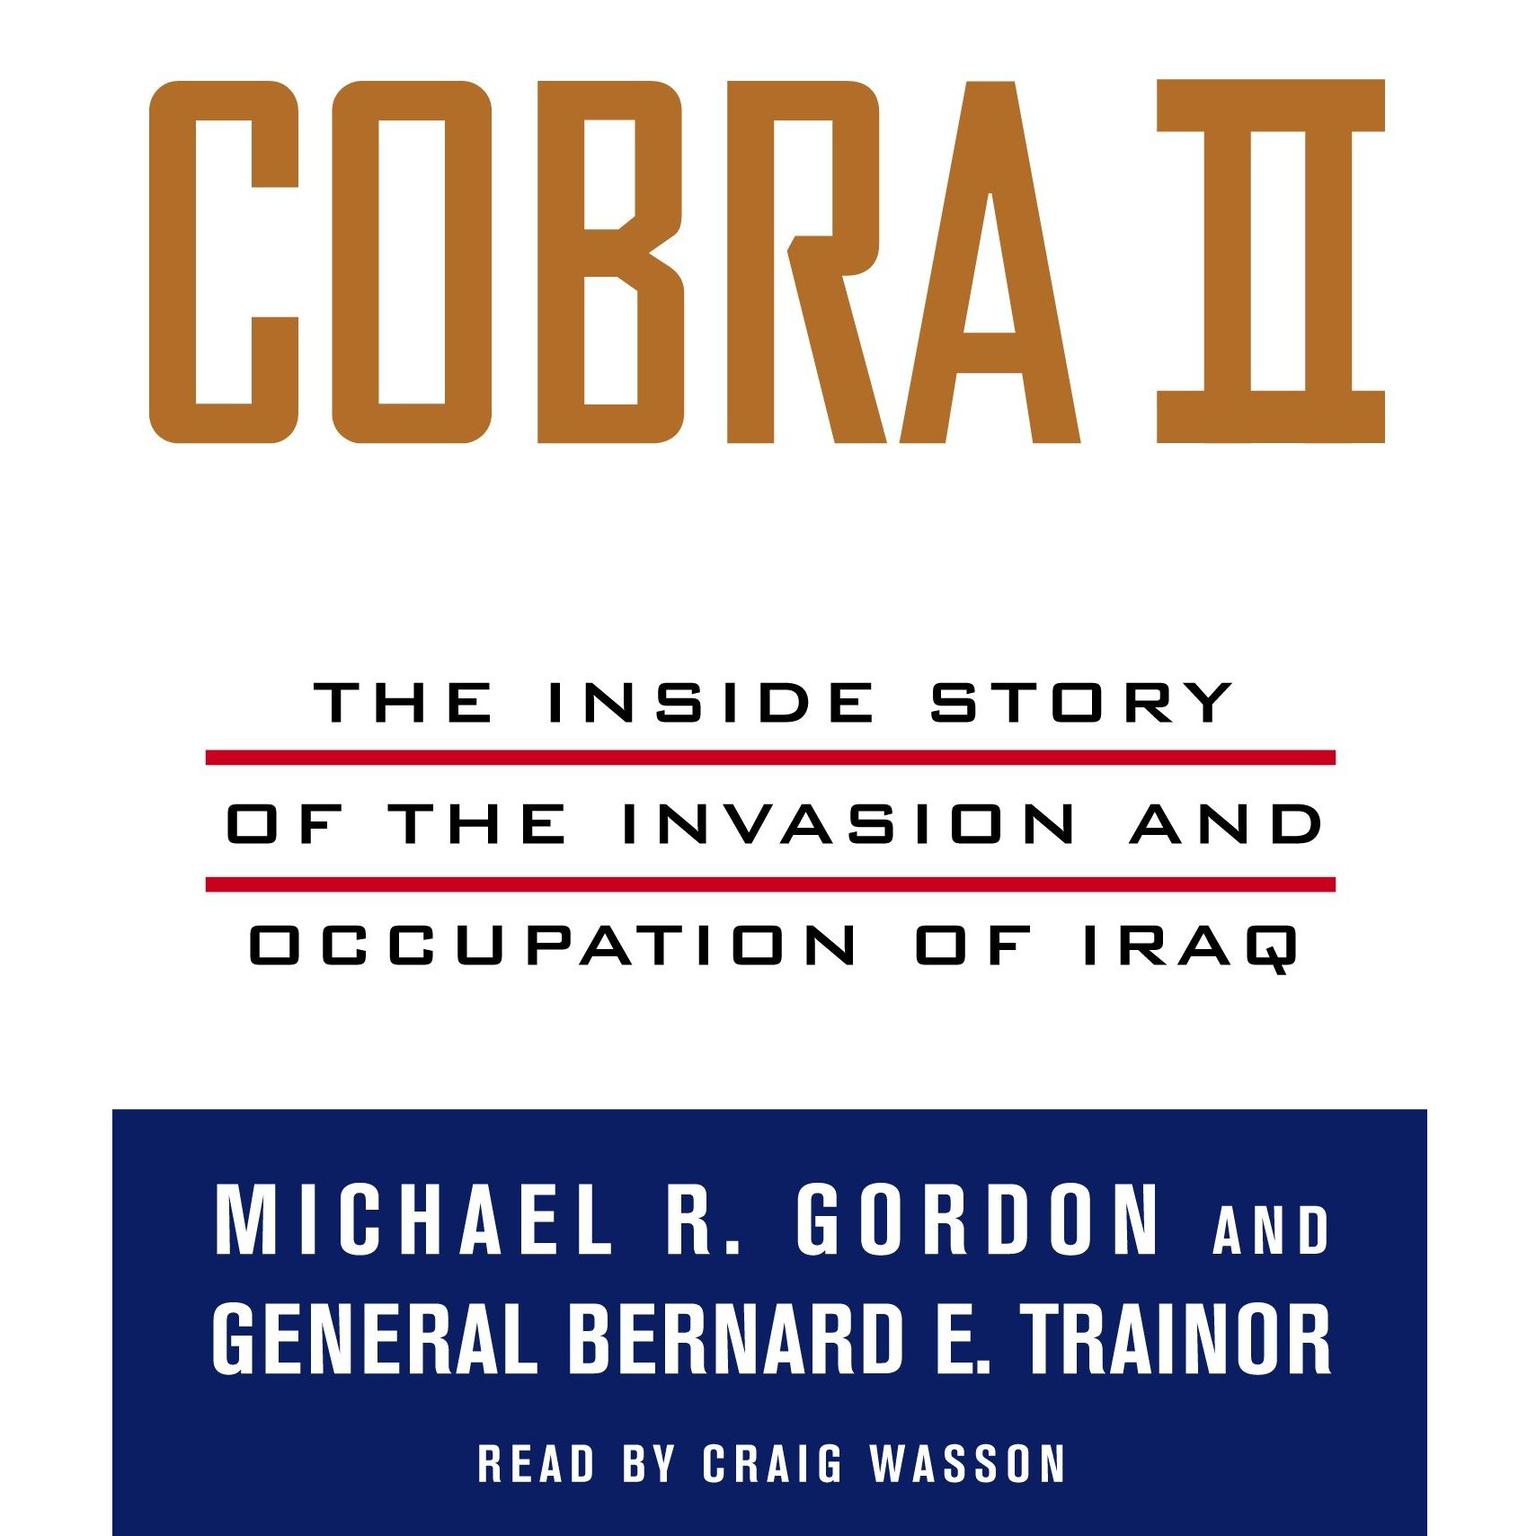 Cobra II: The Inside Story of the Invasion and Occupation of Iraq Audiobook, by Michael R. Gordon